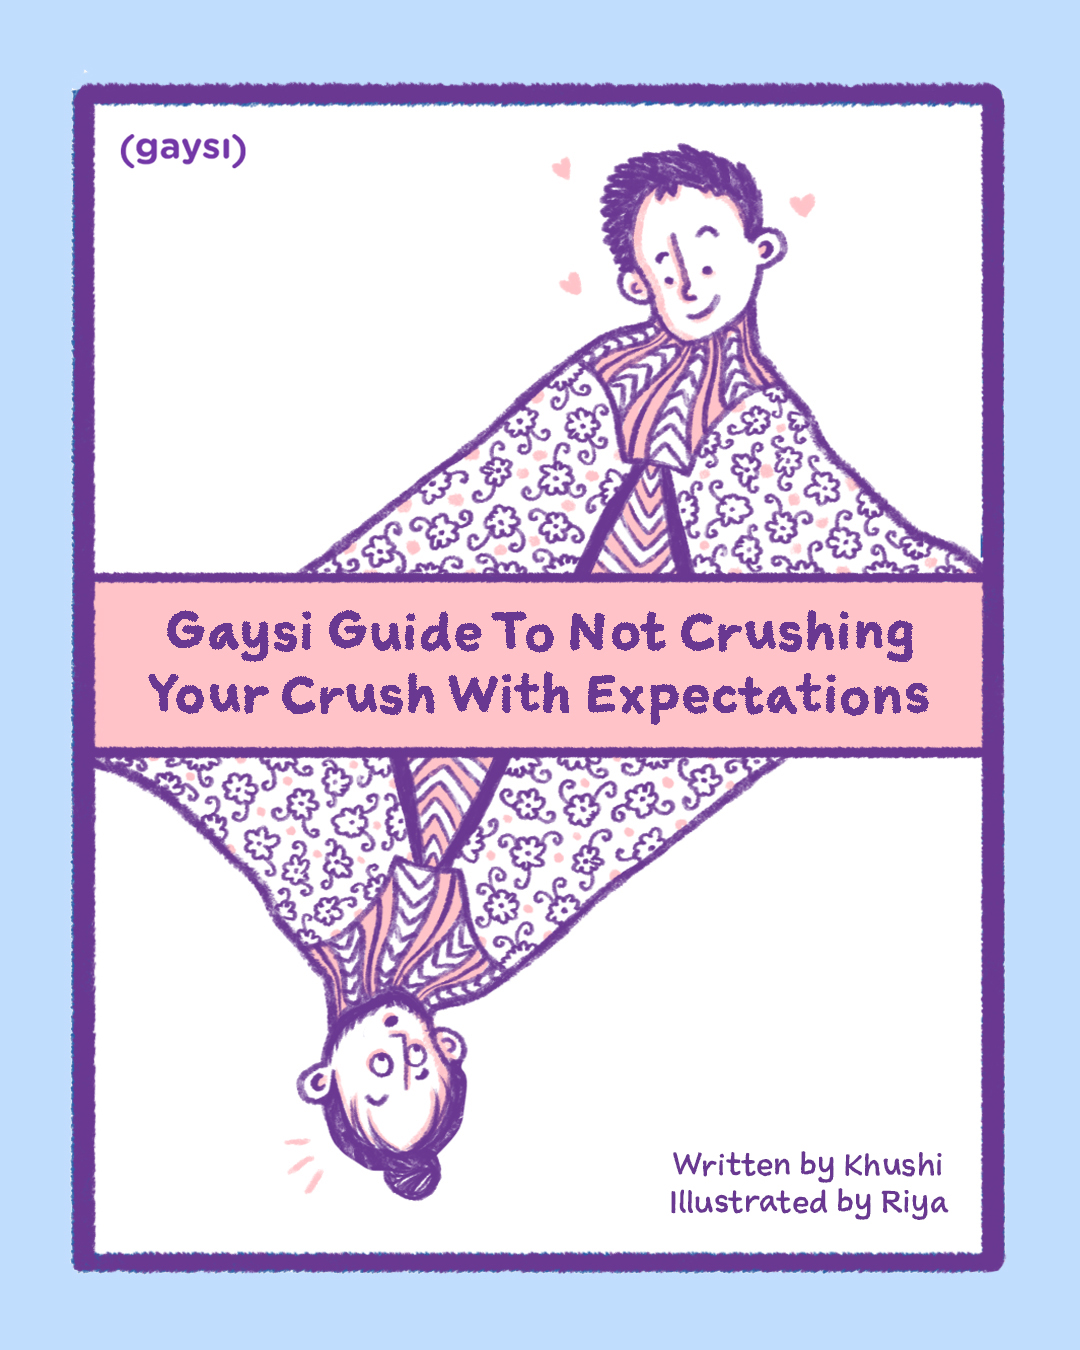 The Gaysi Guide To Not Crushing Your Crush With Expectations